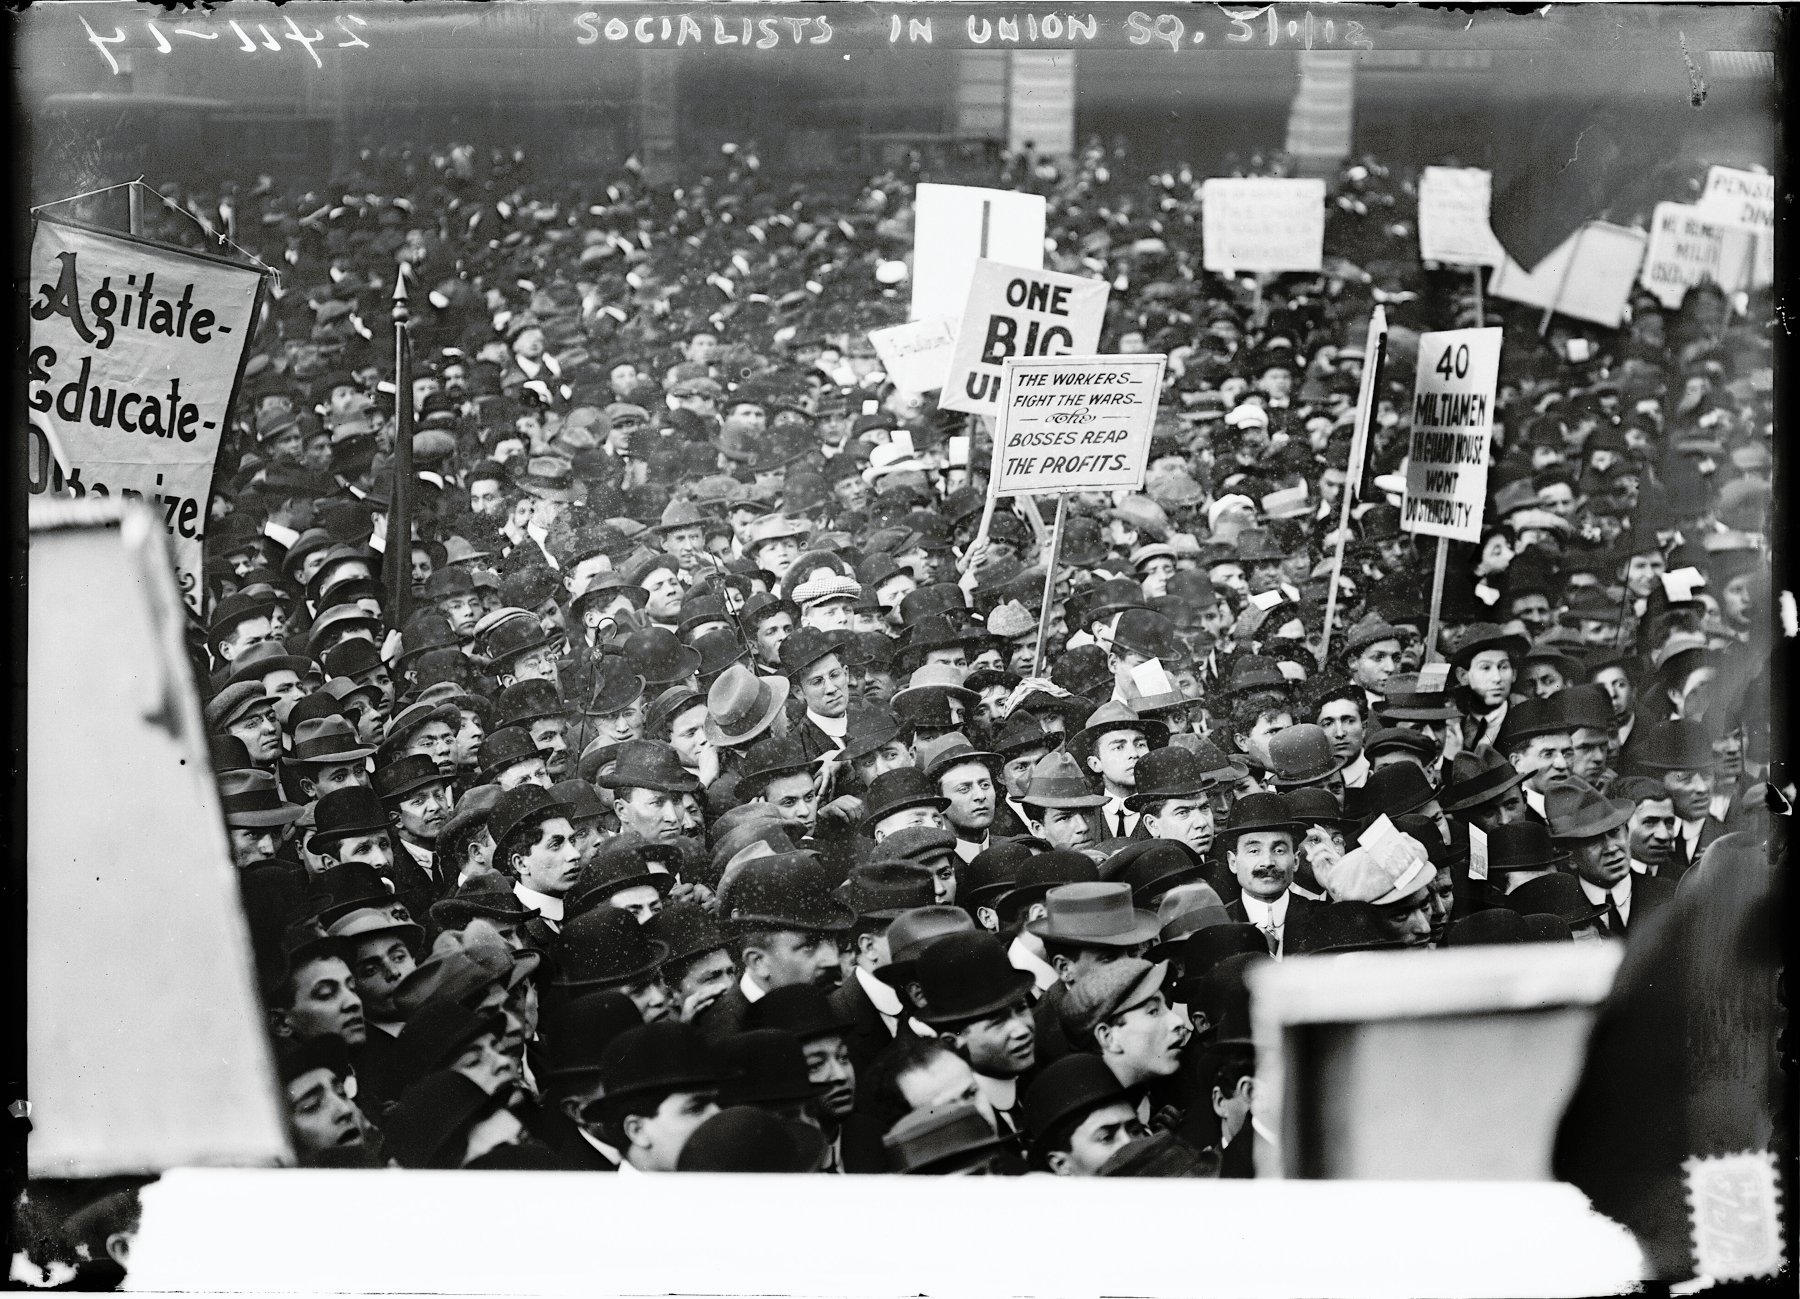 Socialists protest in Union Square, New York City, on May 1, 1912.